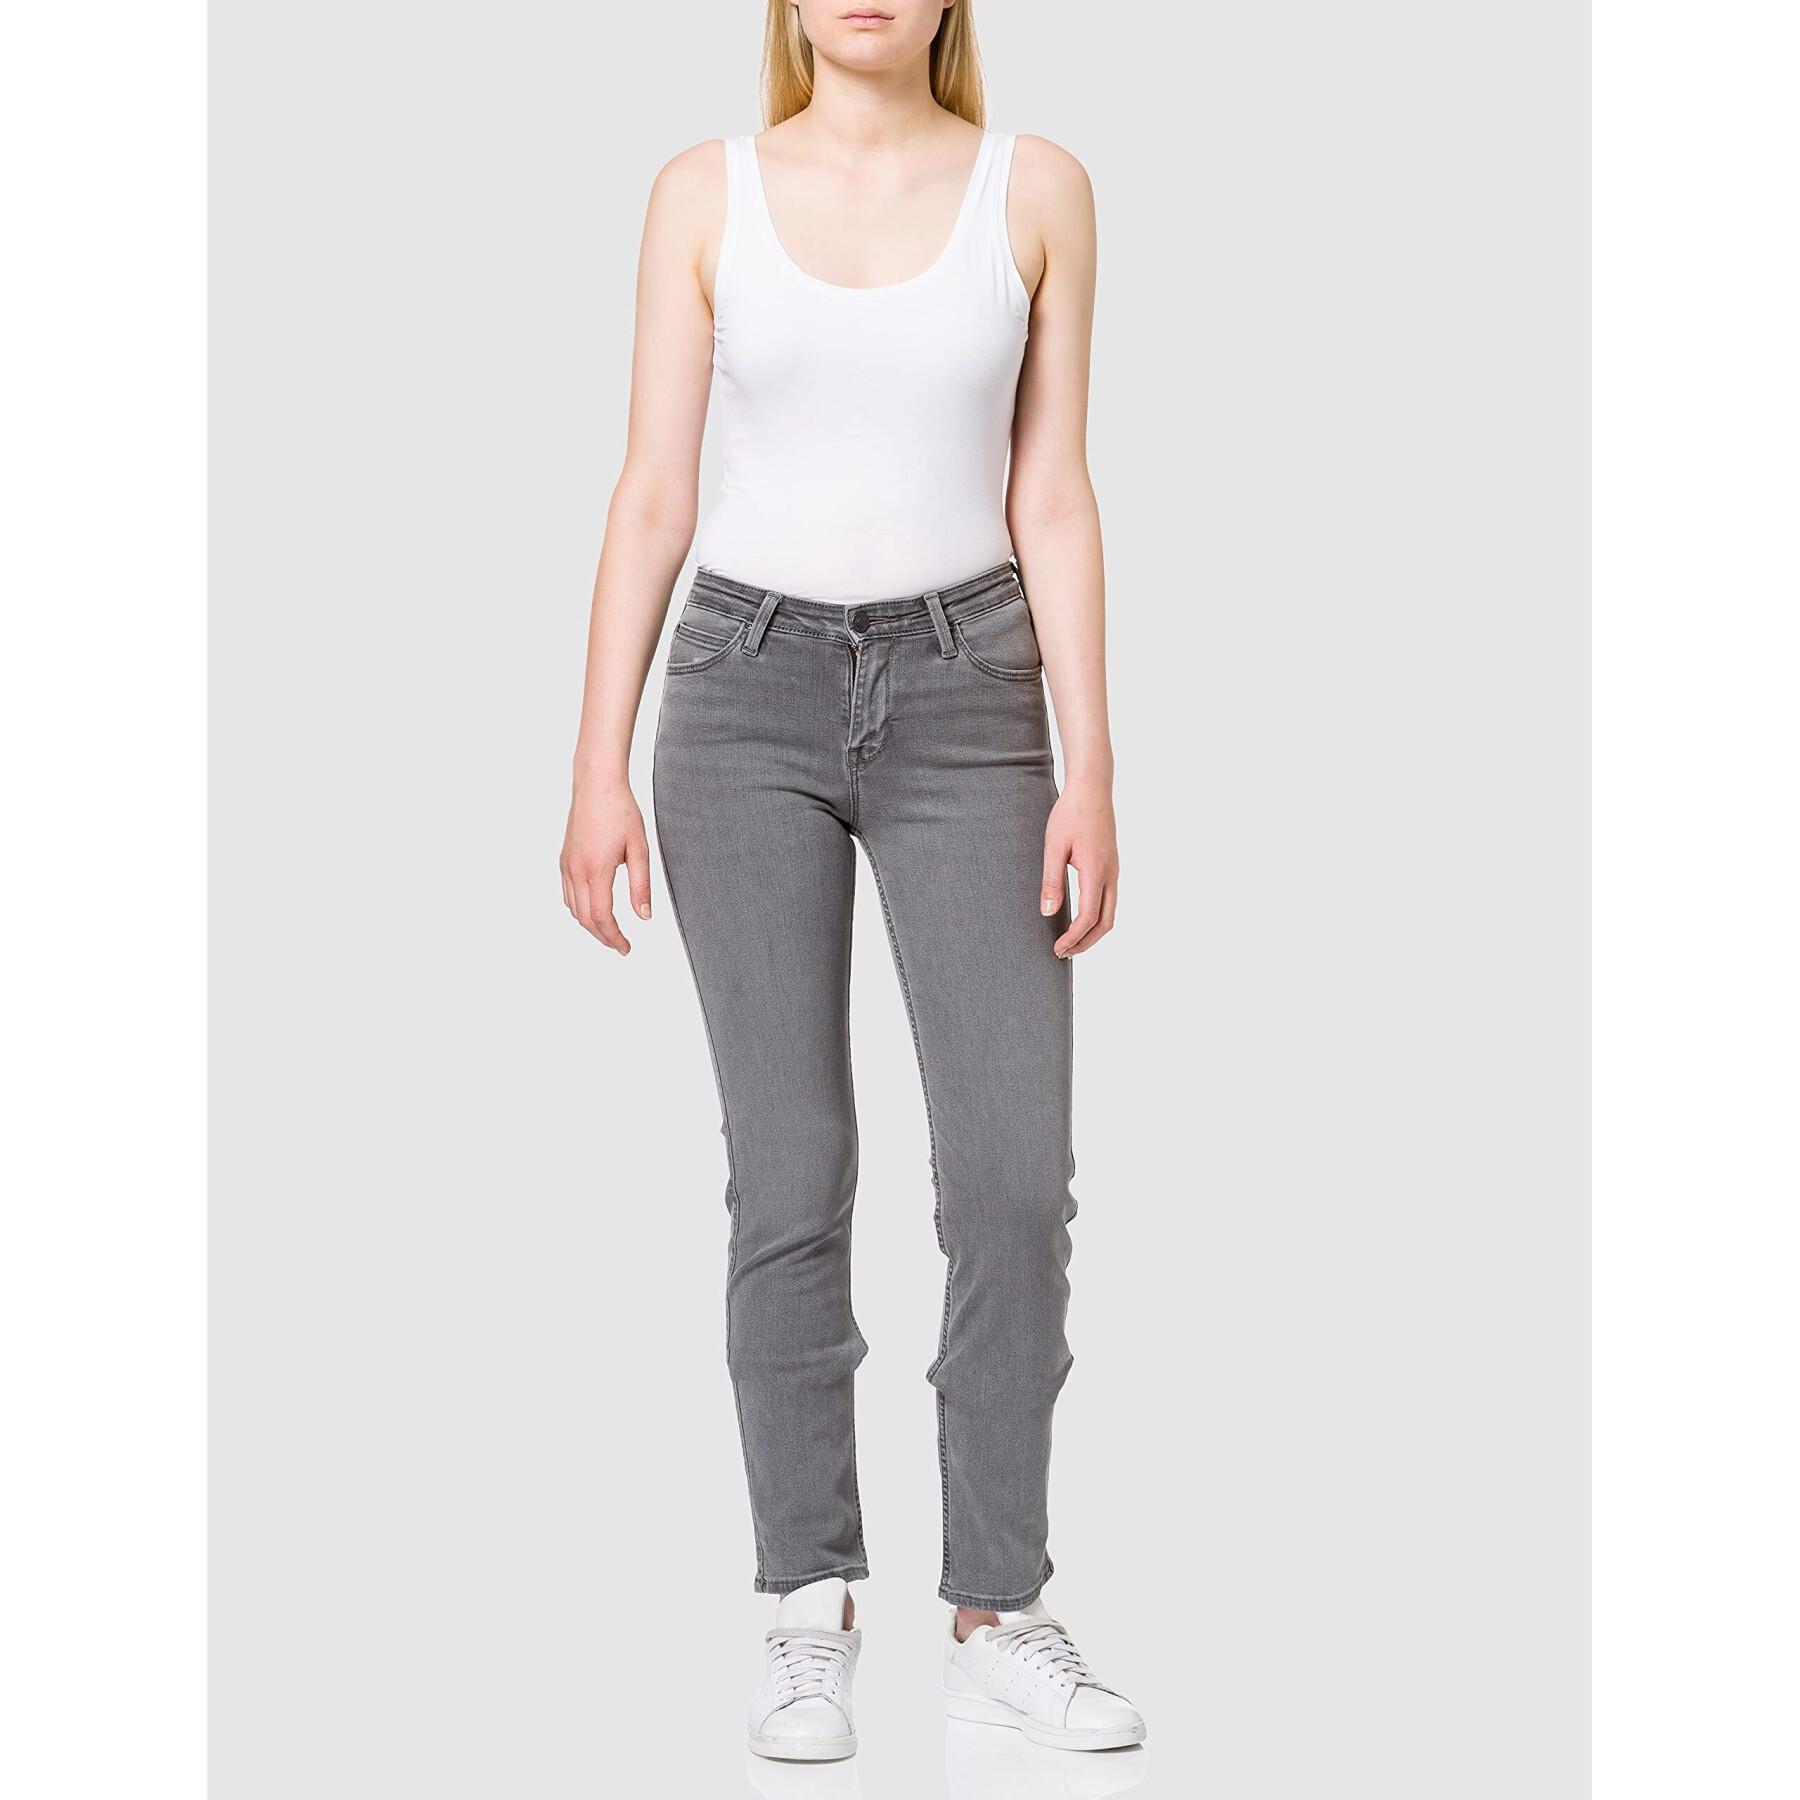 Women's jeans Lee Marion Straight in Grey Holly